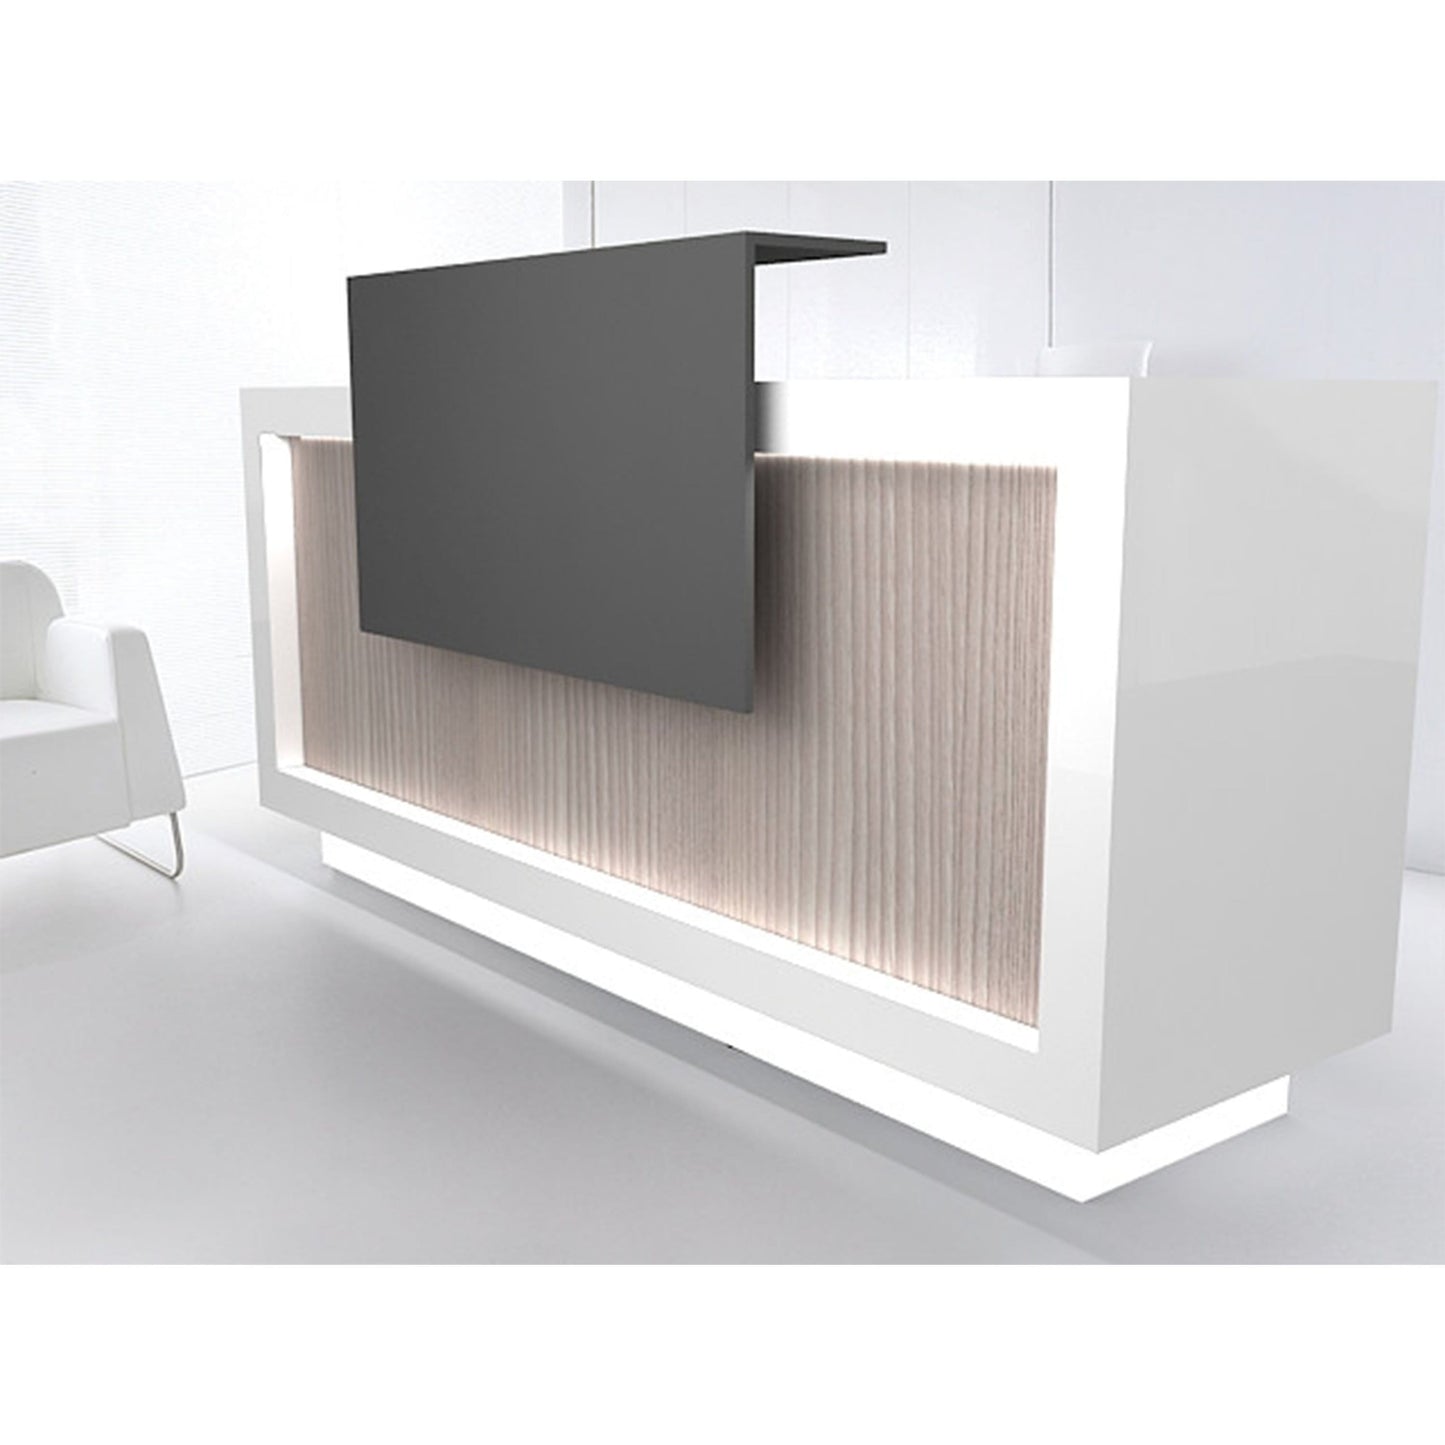 Contemporary reception desk workstation has a modern look with clean lines